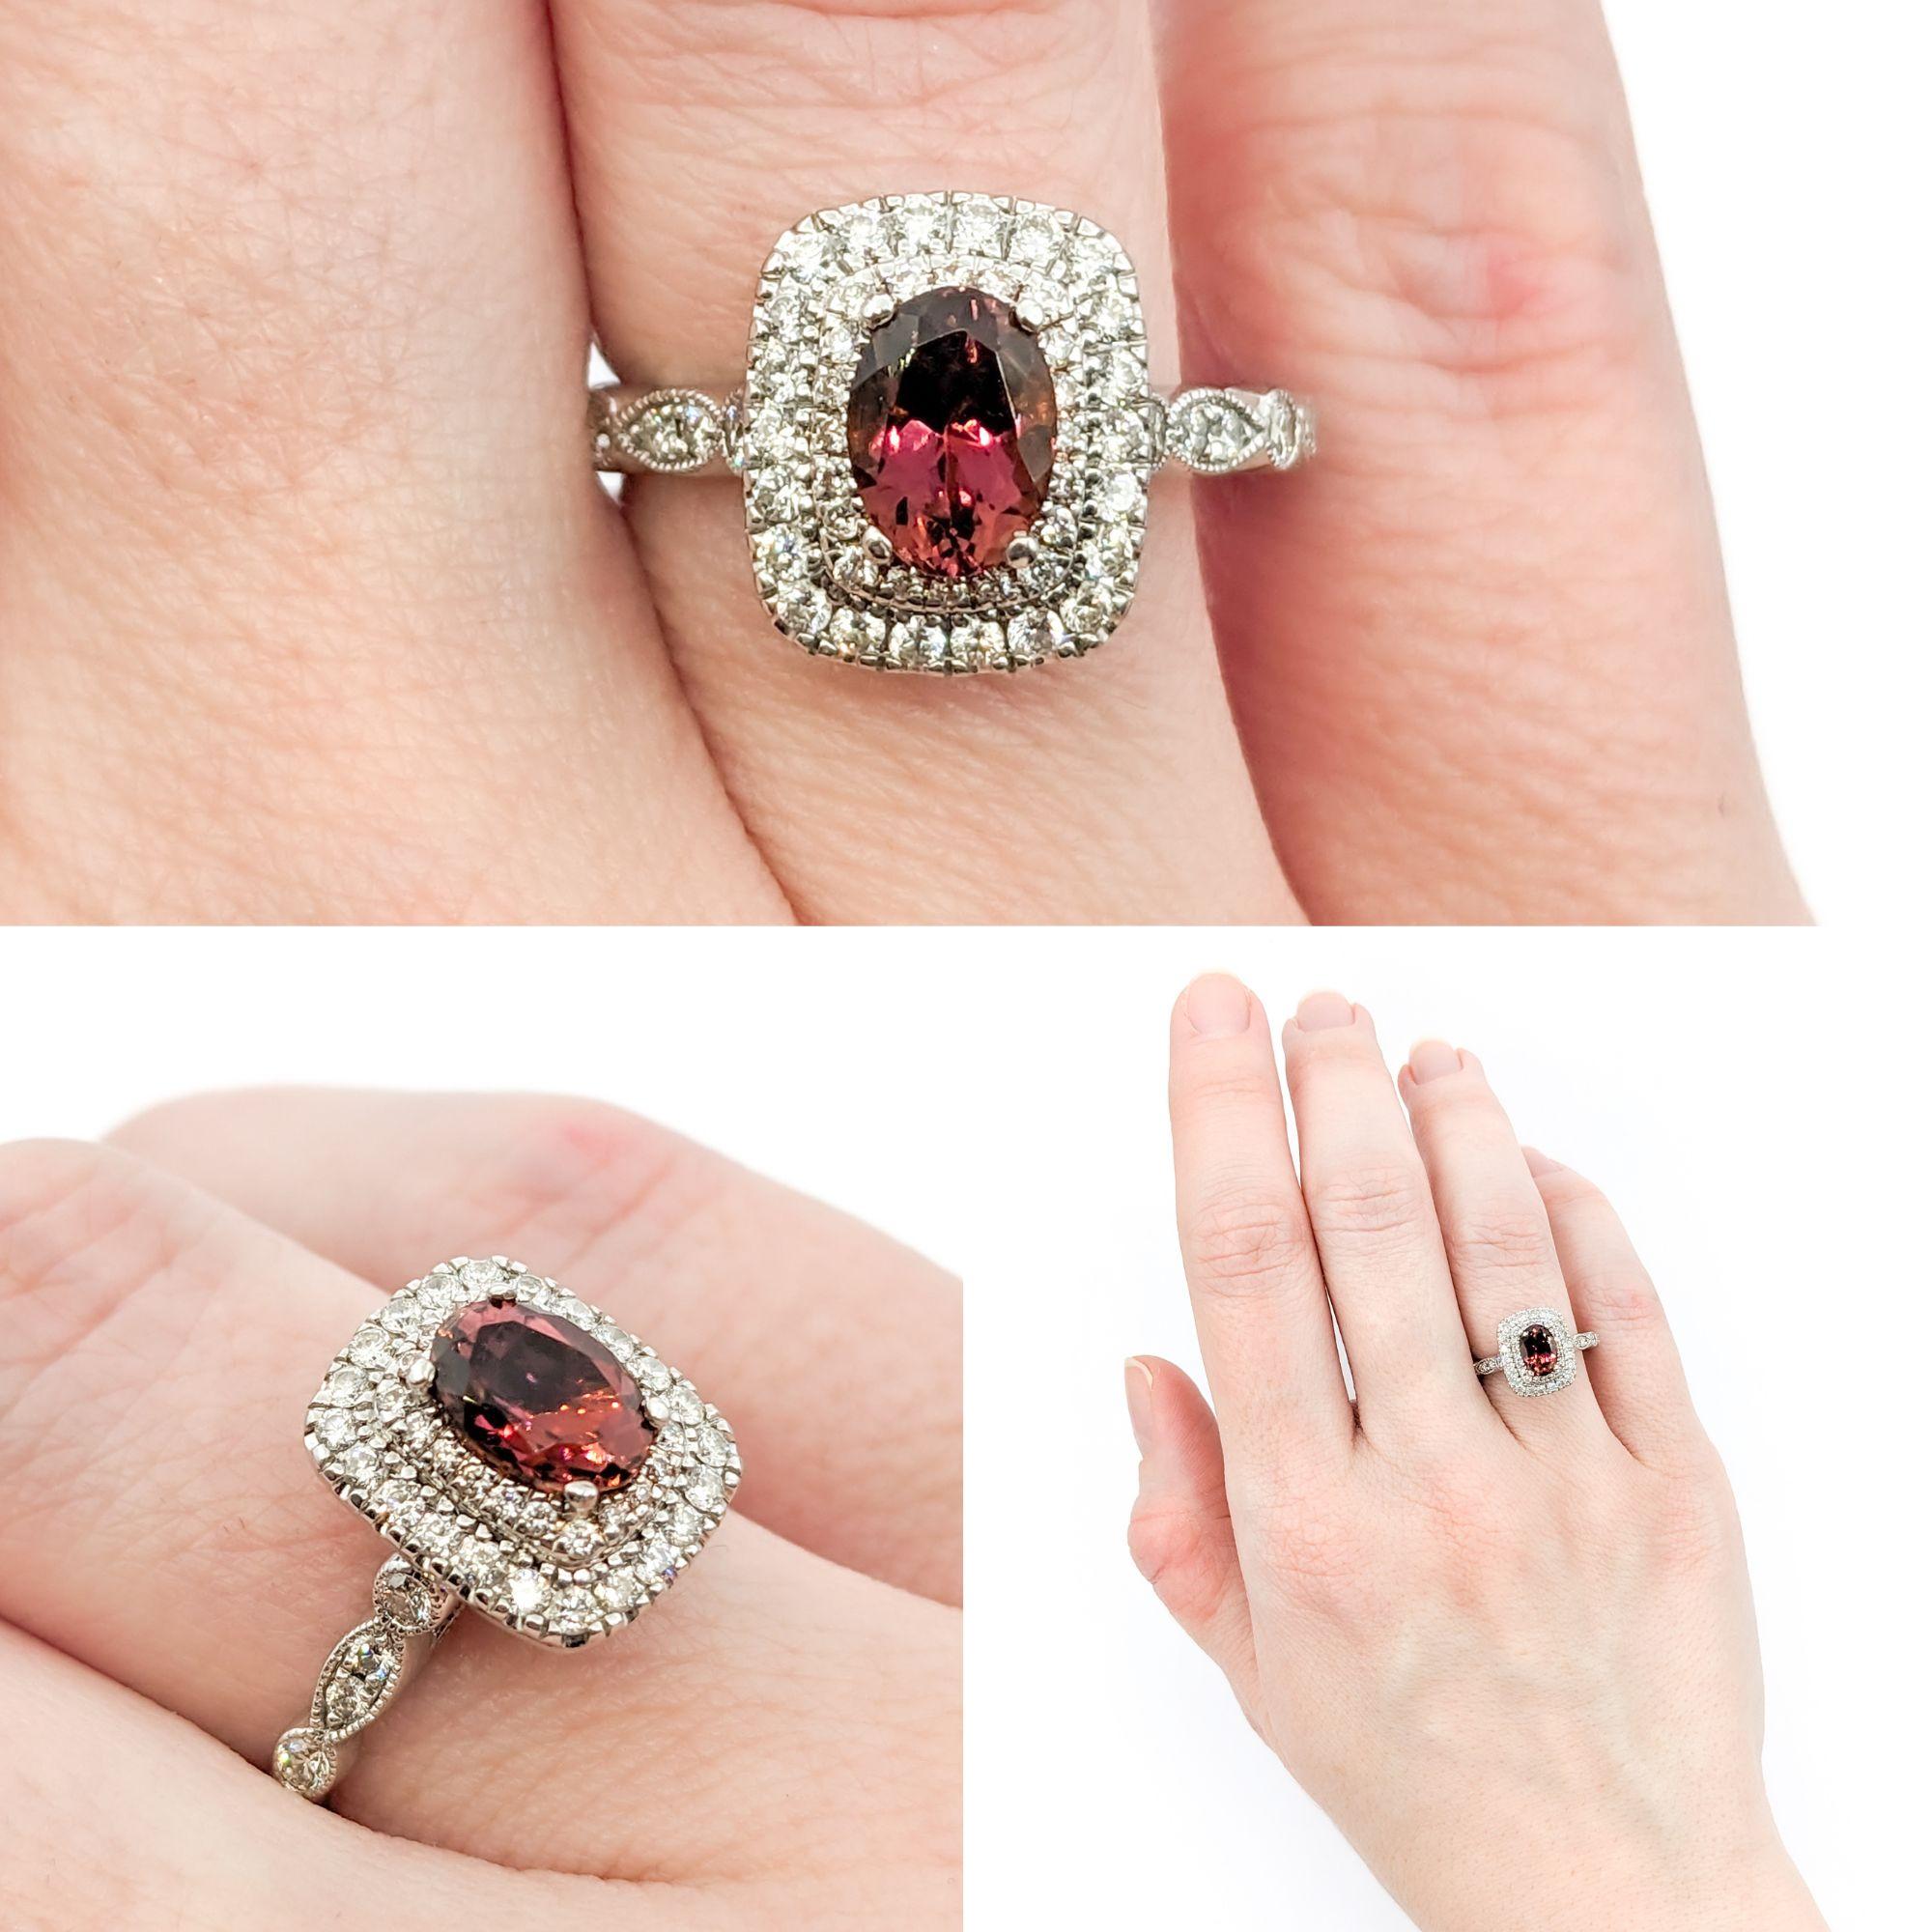 Sparkling Tourmaline & Diamond Dress Ring

This beautiful ring from Neil Lane is crafted in 14kt white gold and features a .88ct oval-cut tourmaline and .40ctw round brilliant-cut diamonds, SI1 clarity and G color. This ring is size 6 but can be